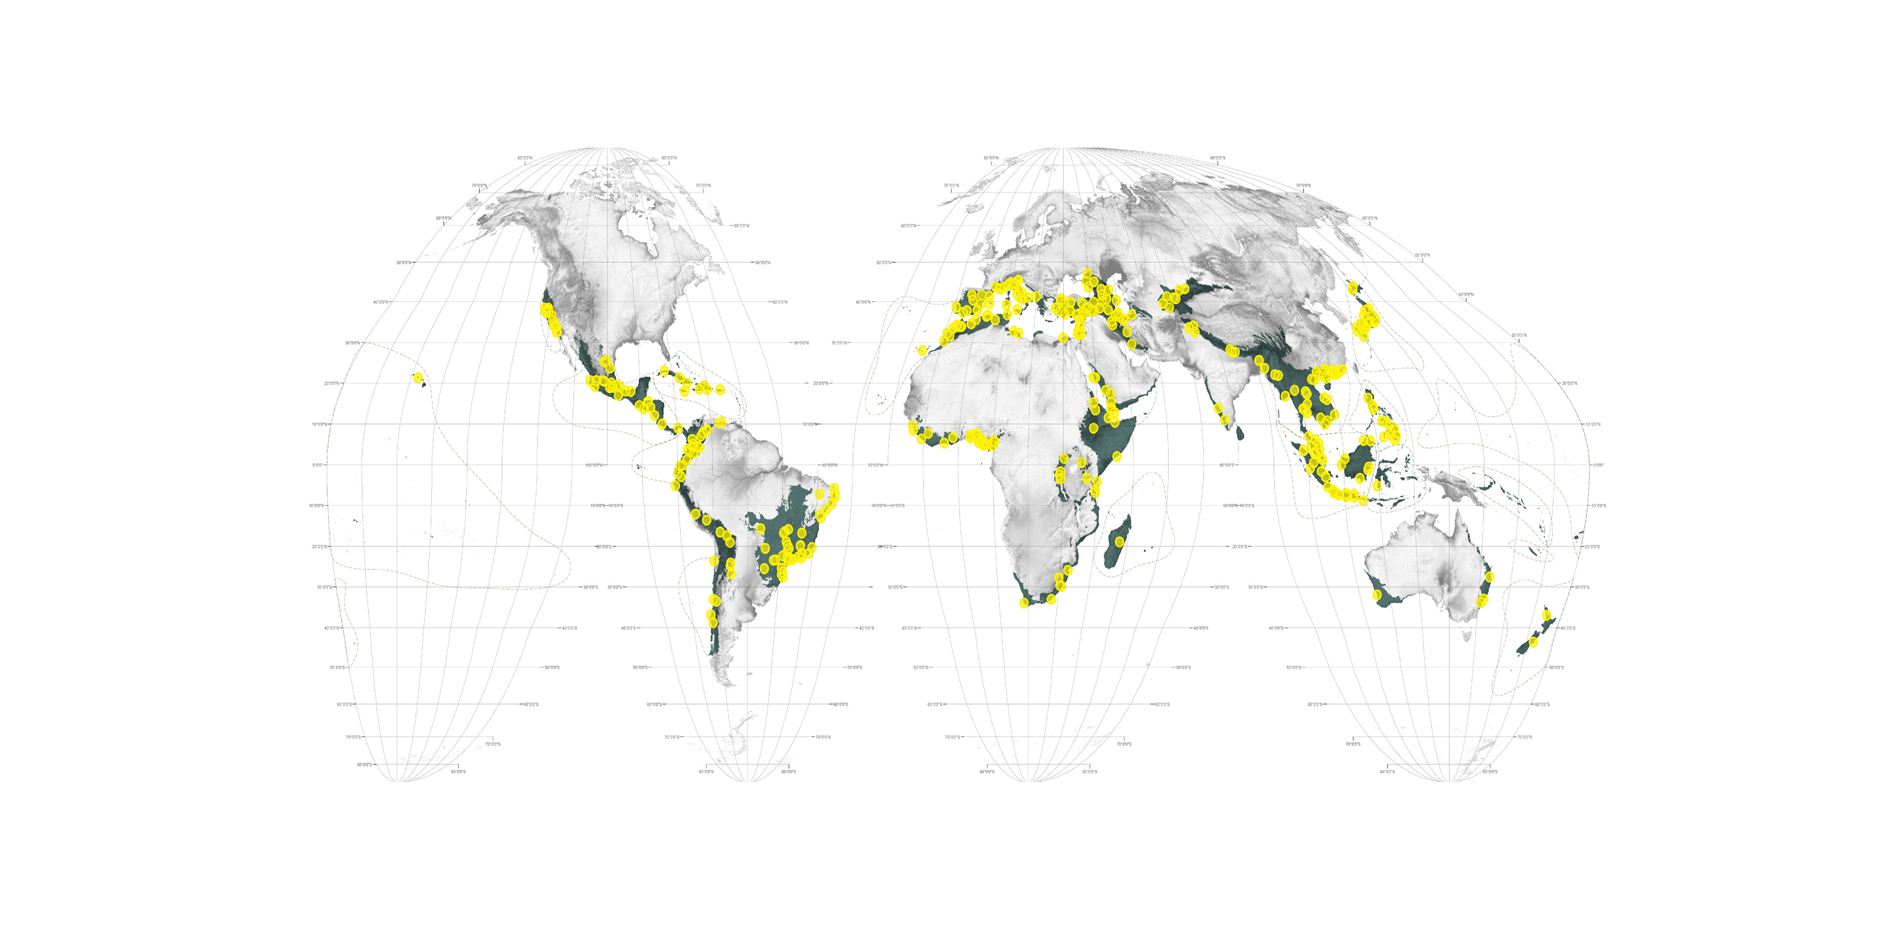 World map highlighting cities in the world's biodiversity hotspots which are sprawling in conflict with remnant habitat and endangered species.…